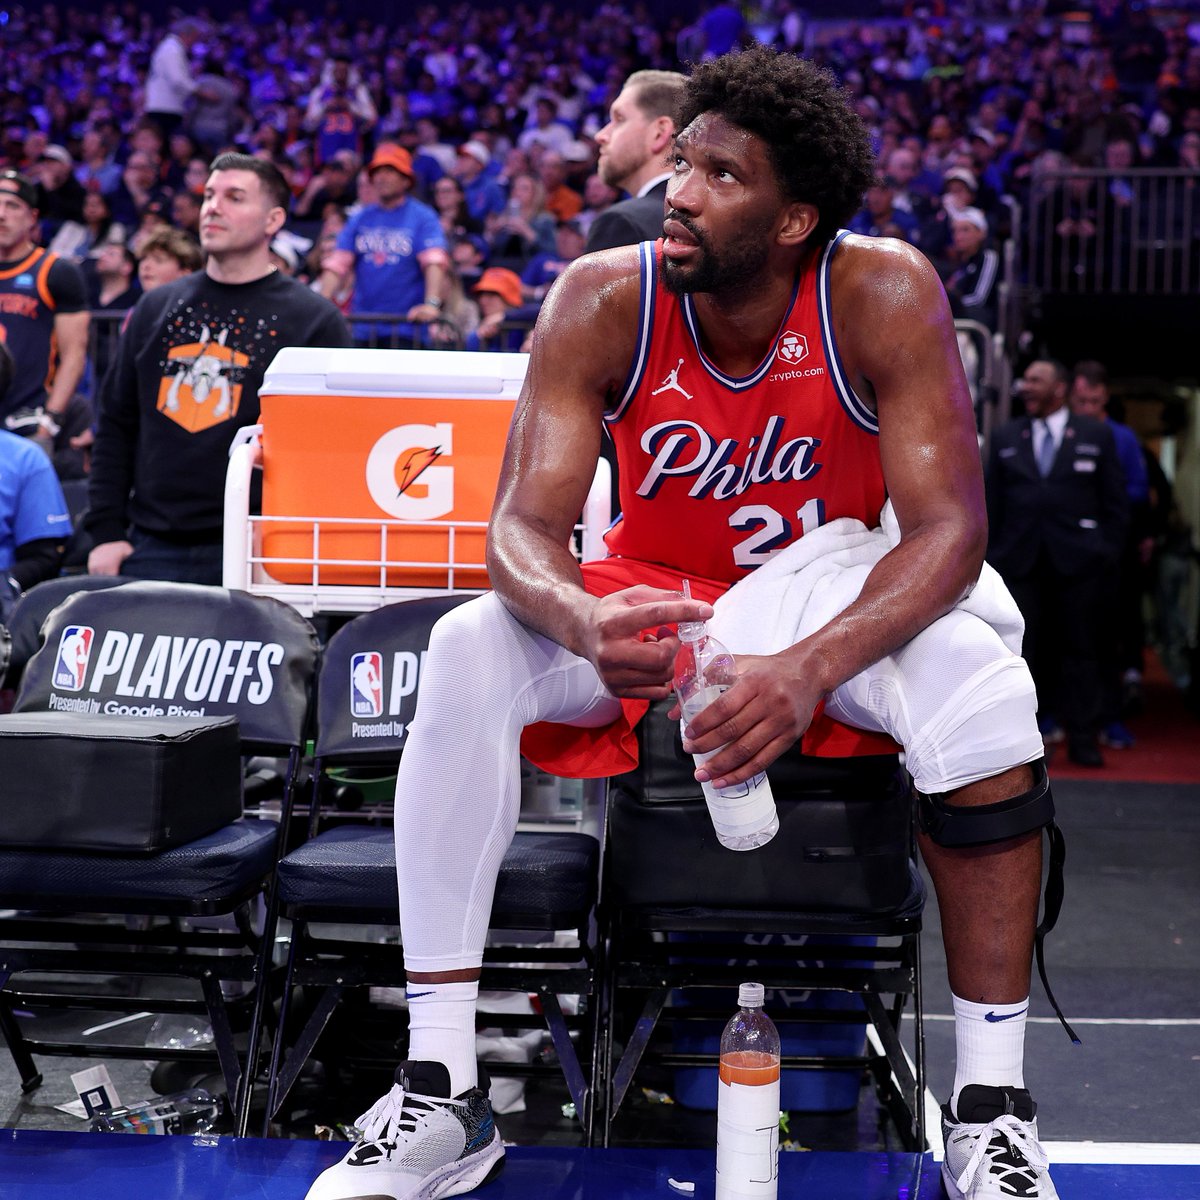 Giglio: 'I understand he's not 100%, but that's the story of every postseason...He had 8 rebs in 37 mins. In 4th he was 0-5 FG, 0-2 3P w/ 0 rebs. '9 straight playoff games he has shot under 50%. Is it too much to ask for Embiid to be the MVP of the regular season in playoffs?'